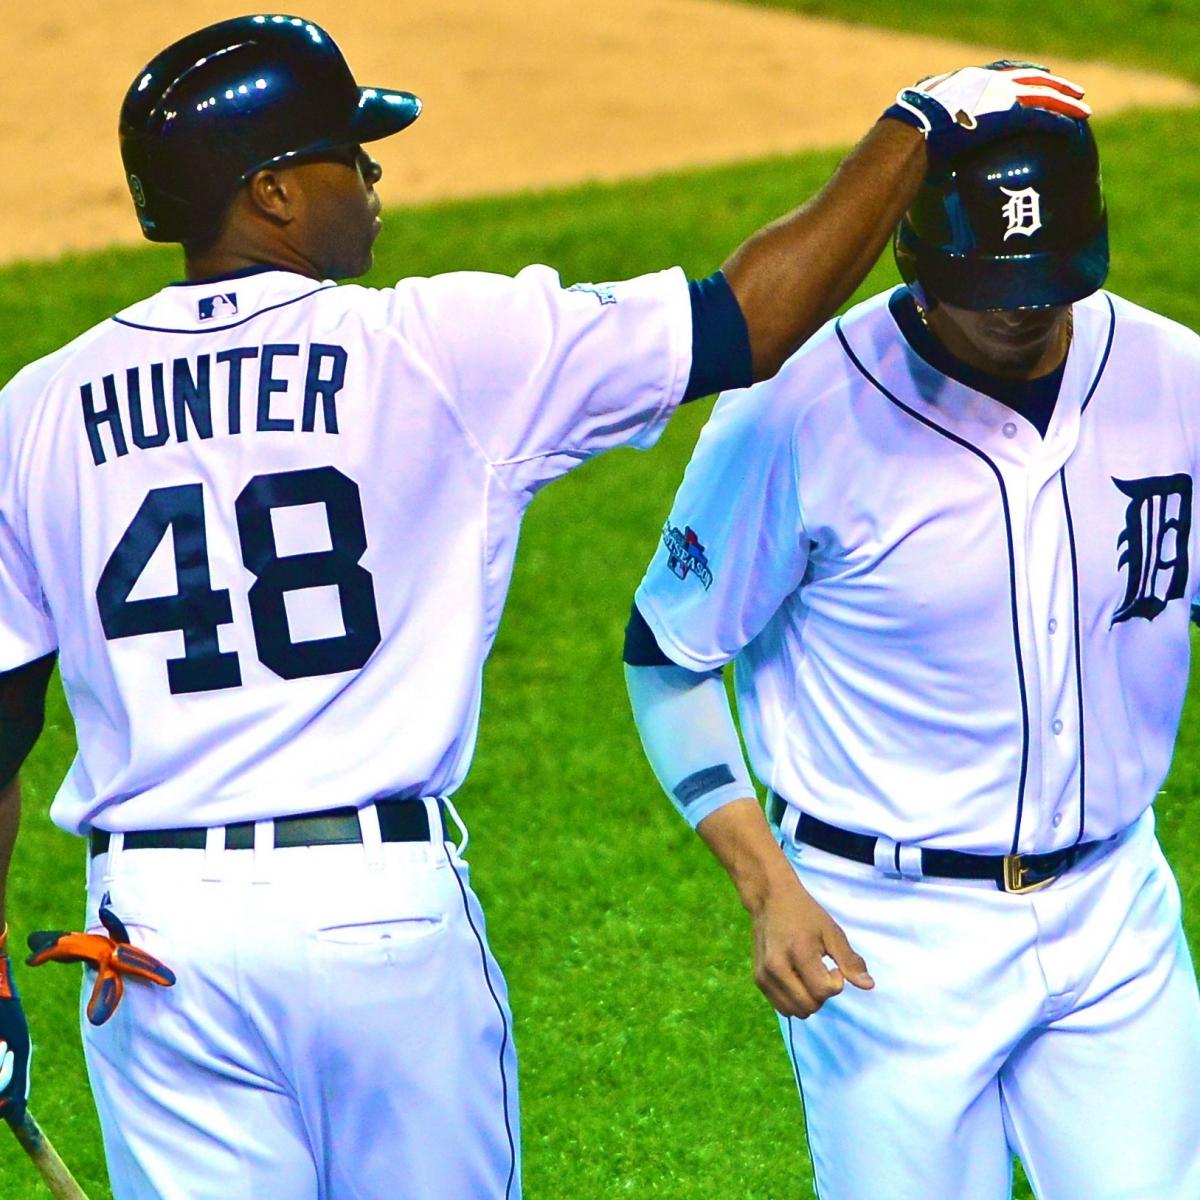 ALCS Game 4, Red Sox vs. Tigers GIF recap: Detroit gets to Peavy early 